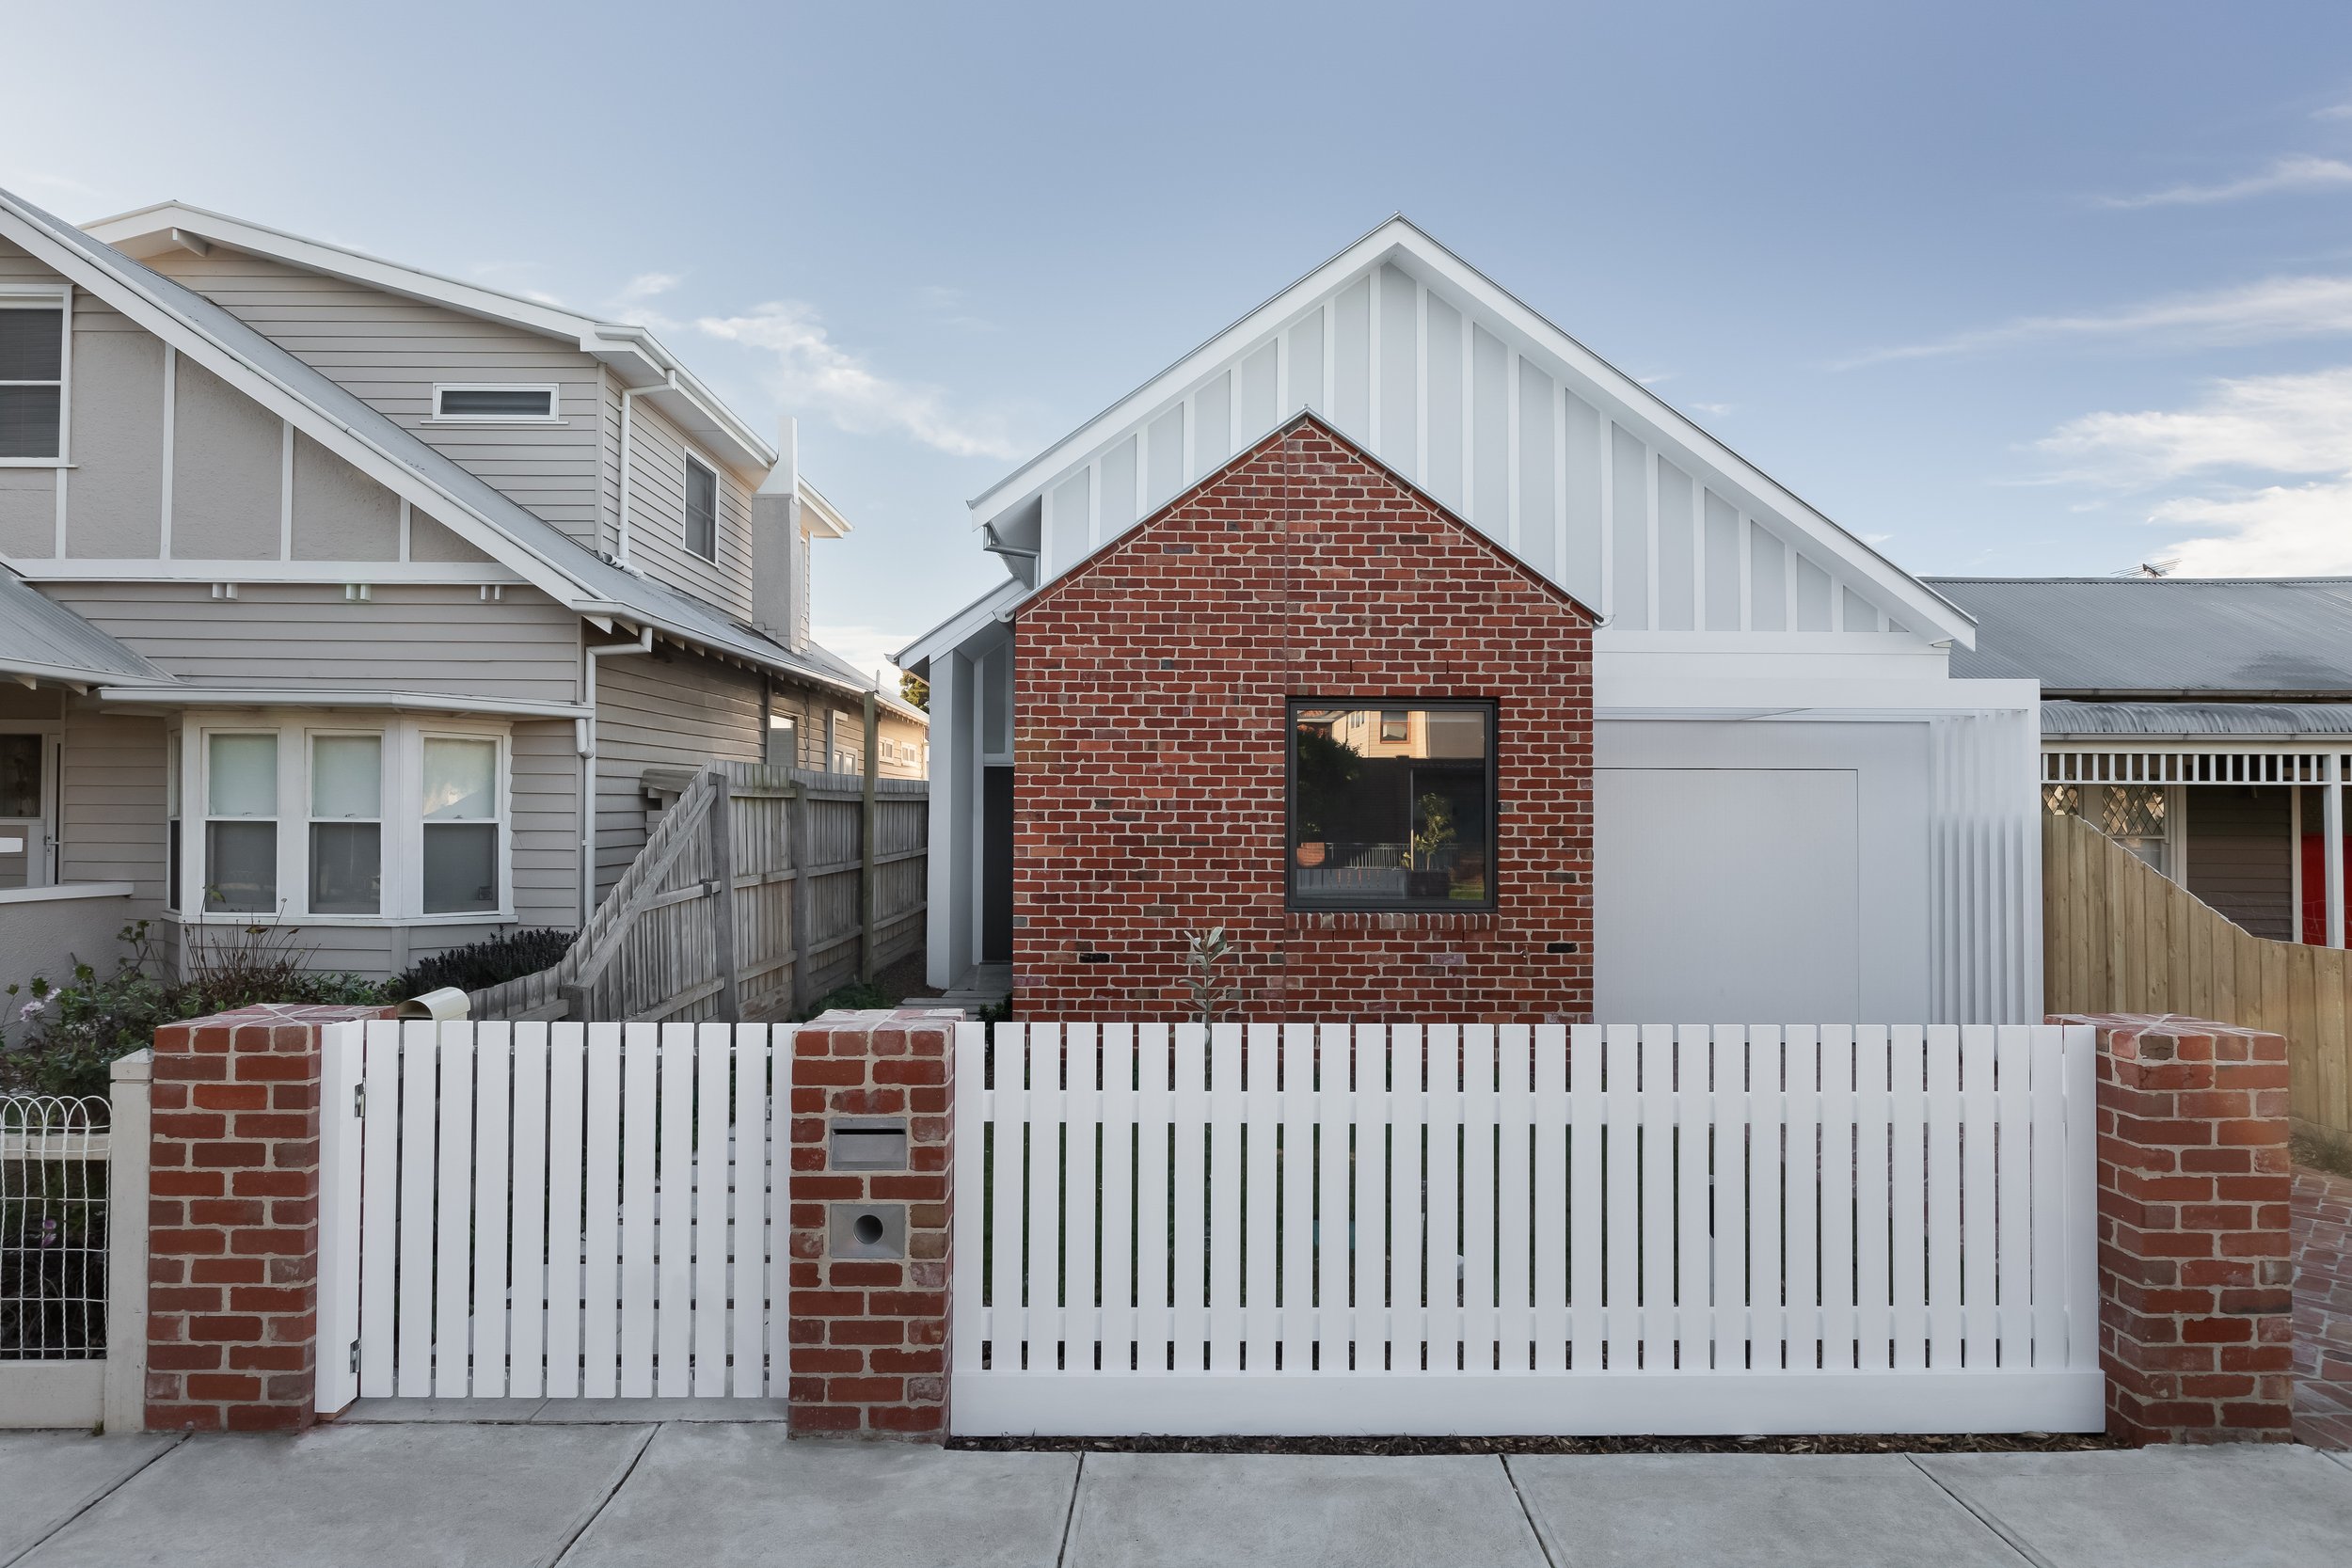 Knock down rebuild, Heritage overlay red brick and white wood clad building with picket fence - Melbourne Australia